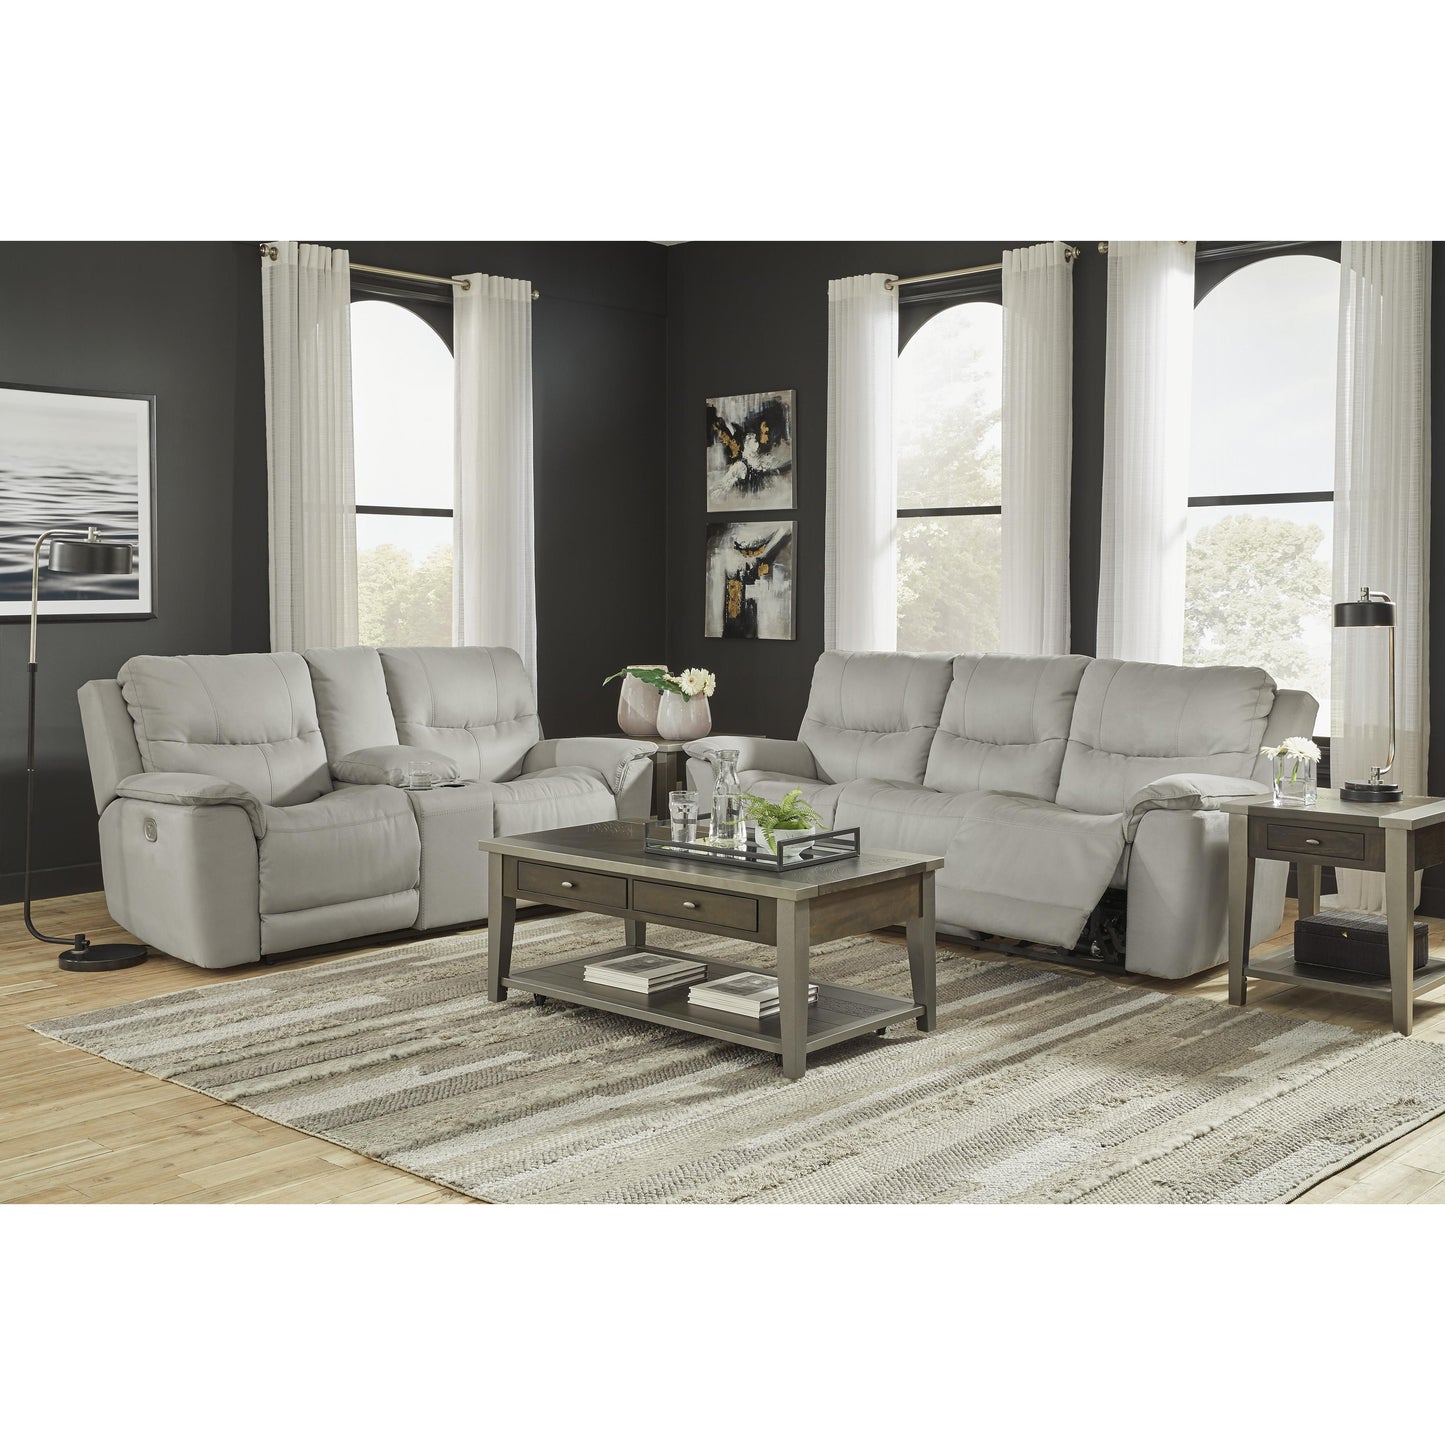 Signature Design by Ashley Next-Gen Gaucho Power Reclining Leather Look Loveseat 6080618 IMAGE 11